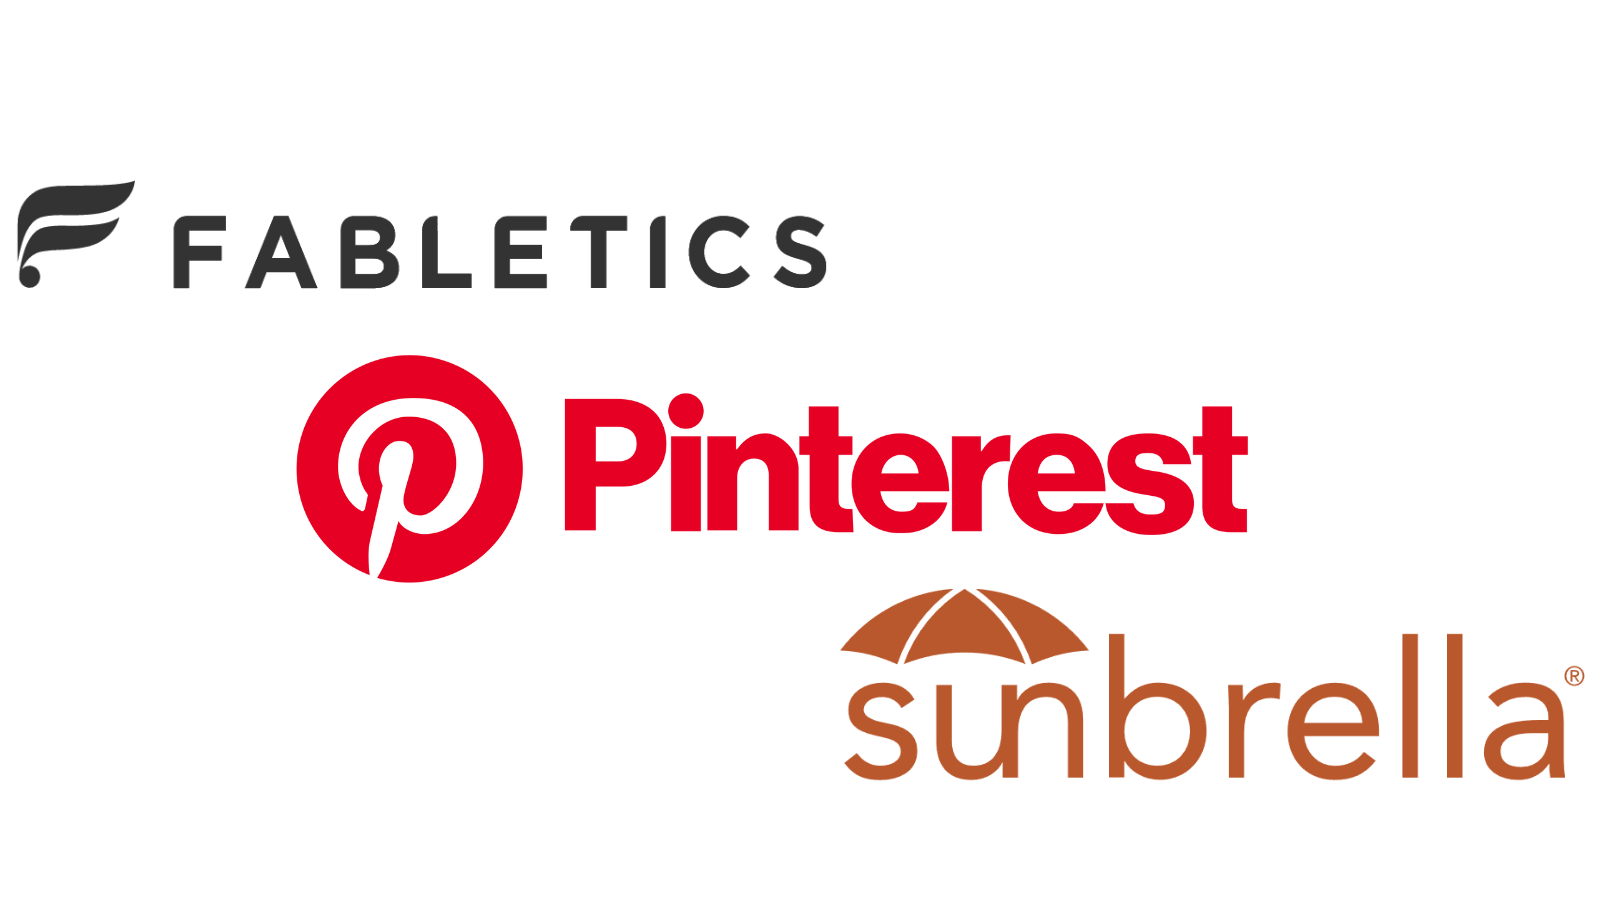 The logos and wordmarks for Fabletics, Pinterest, and Sunbrella